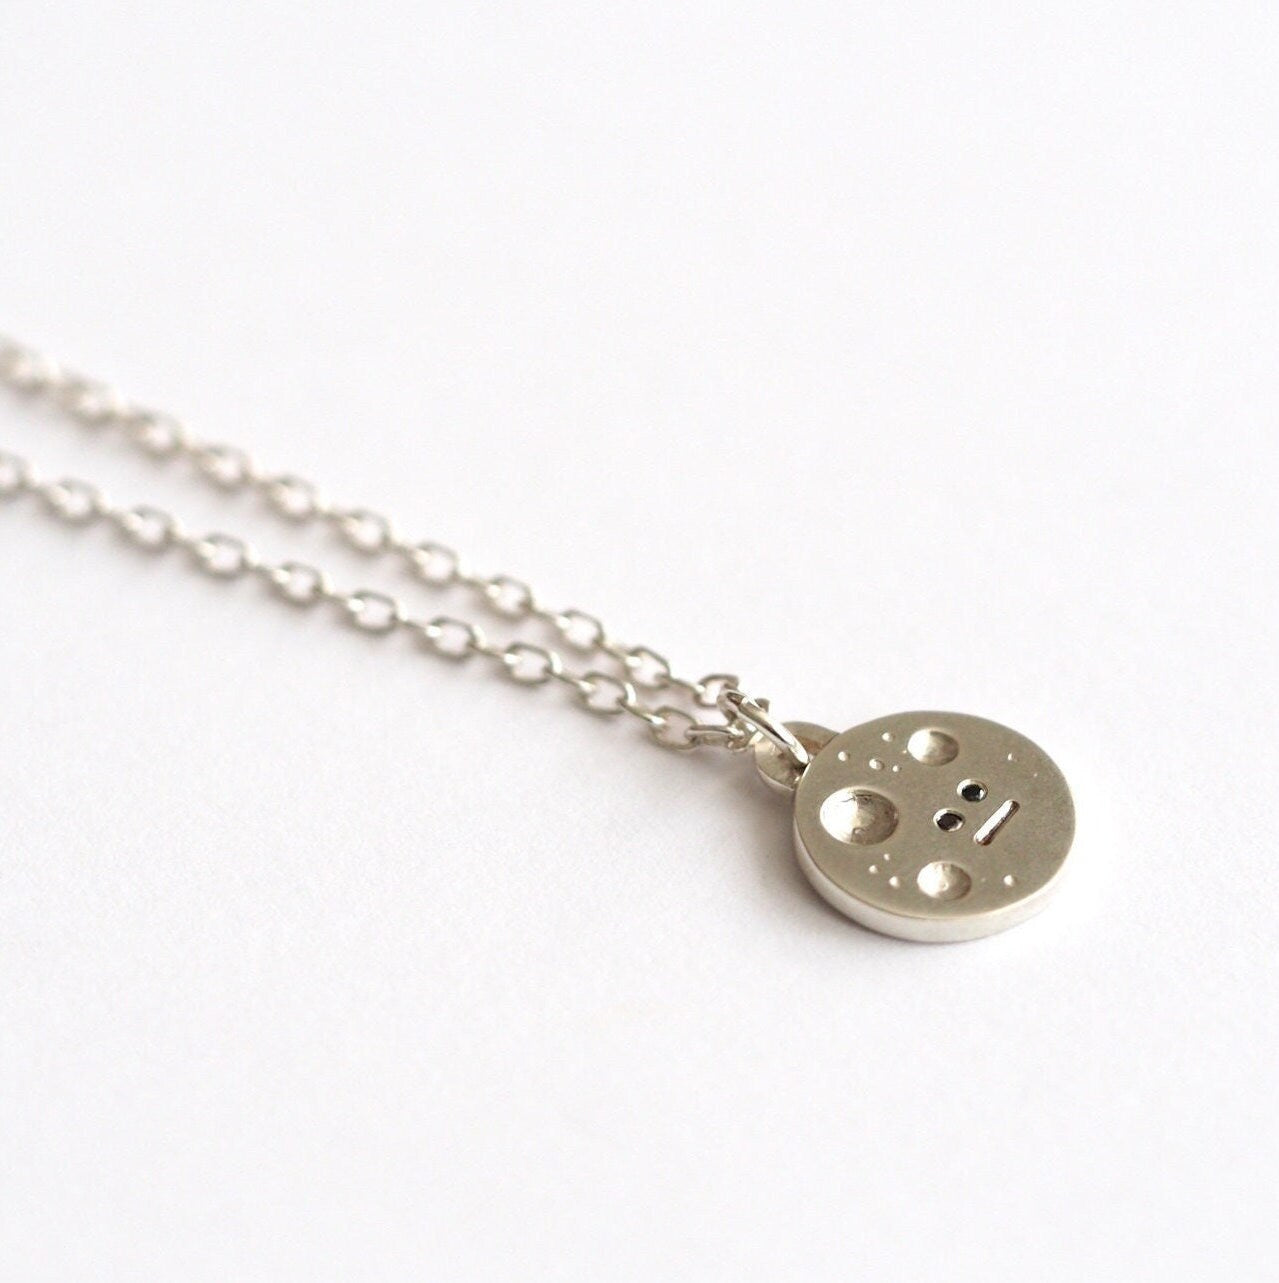 Full Moon Necklace - Recycled Silver and Black Diamonds